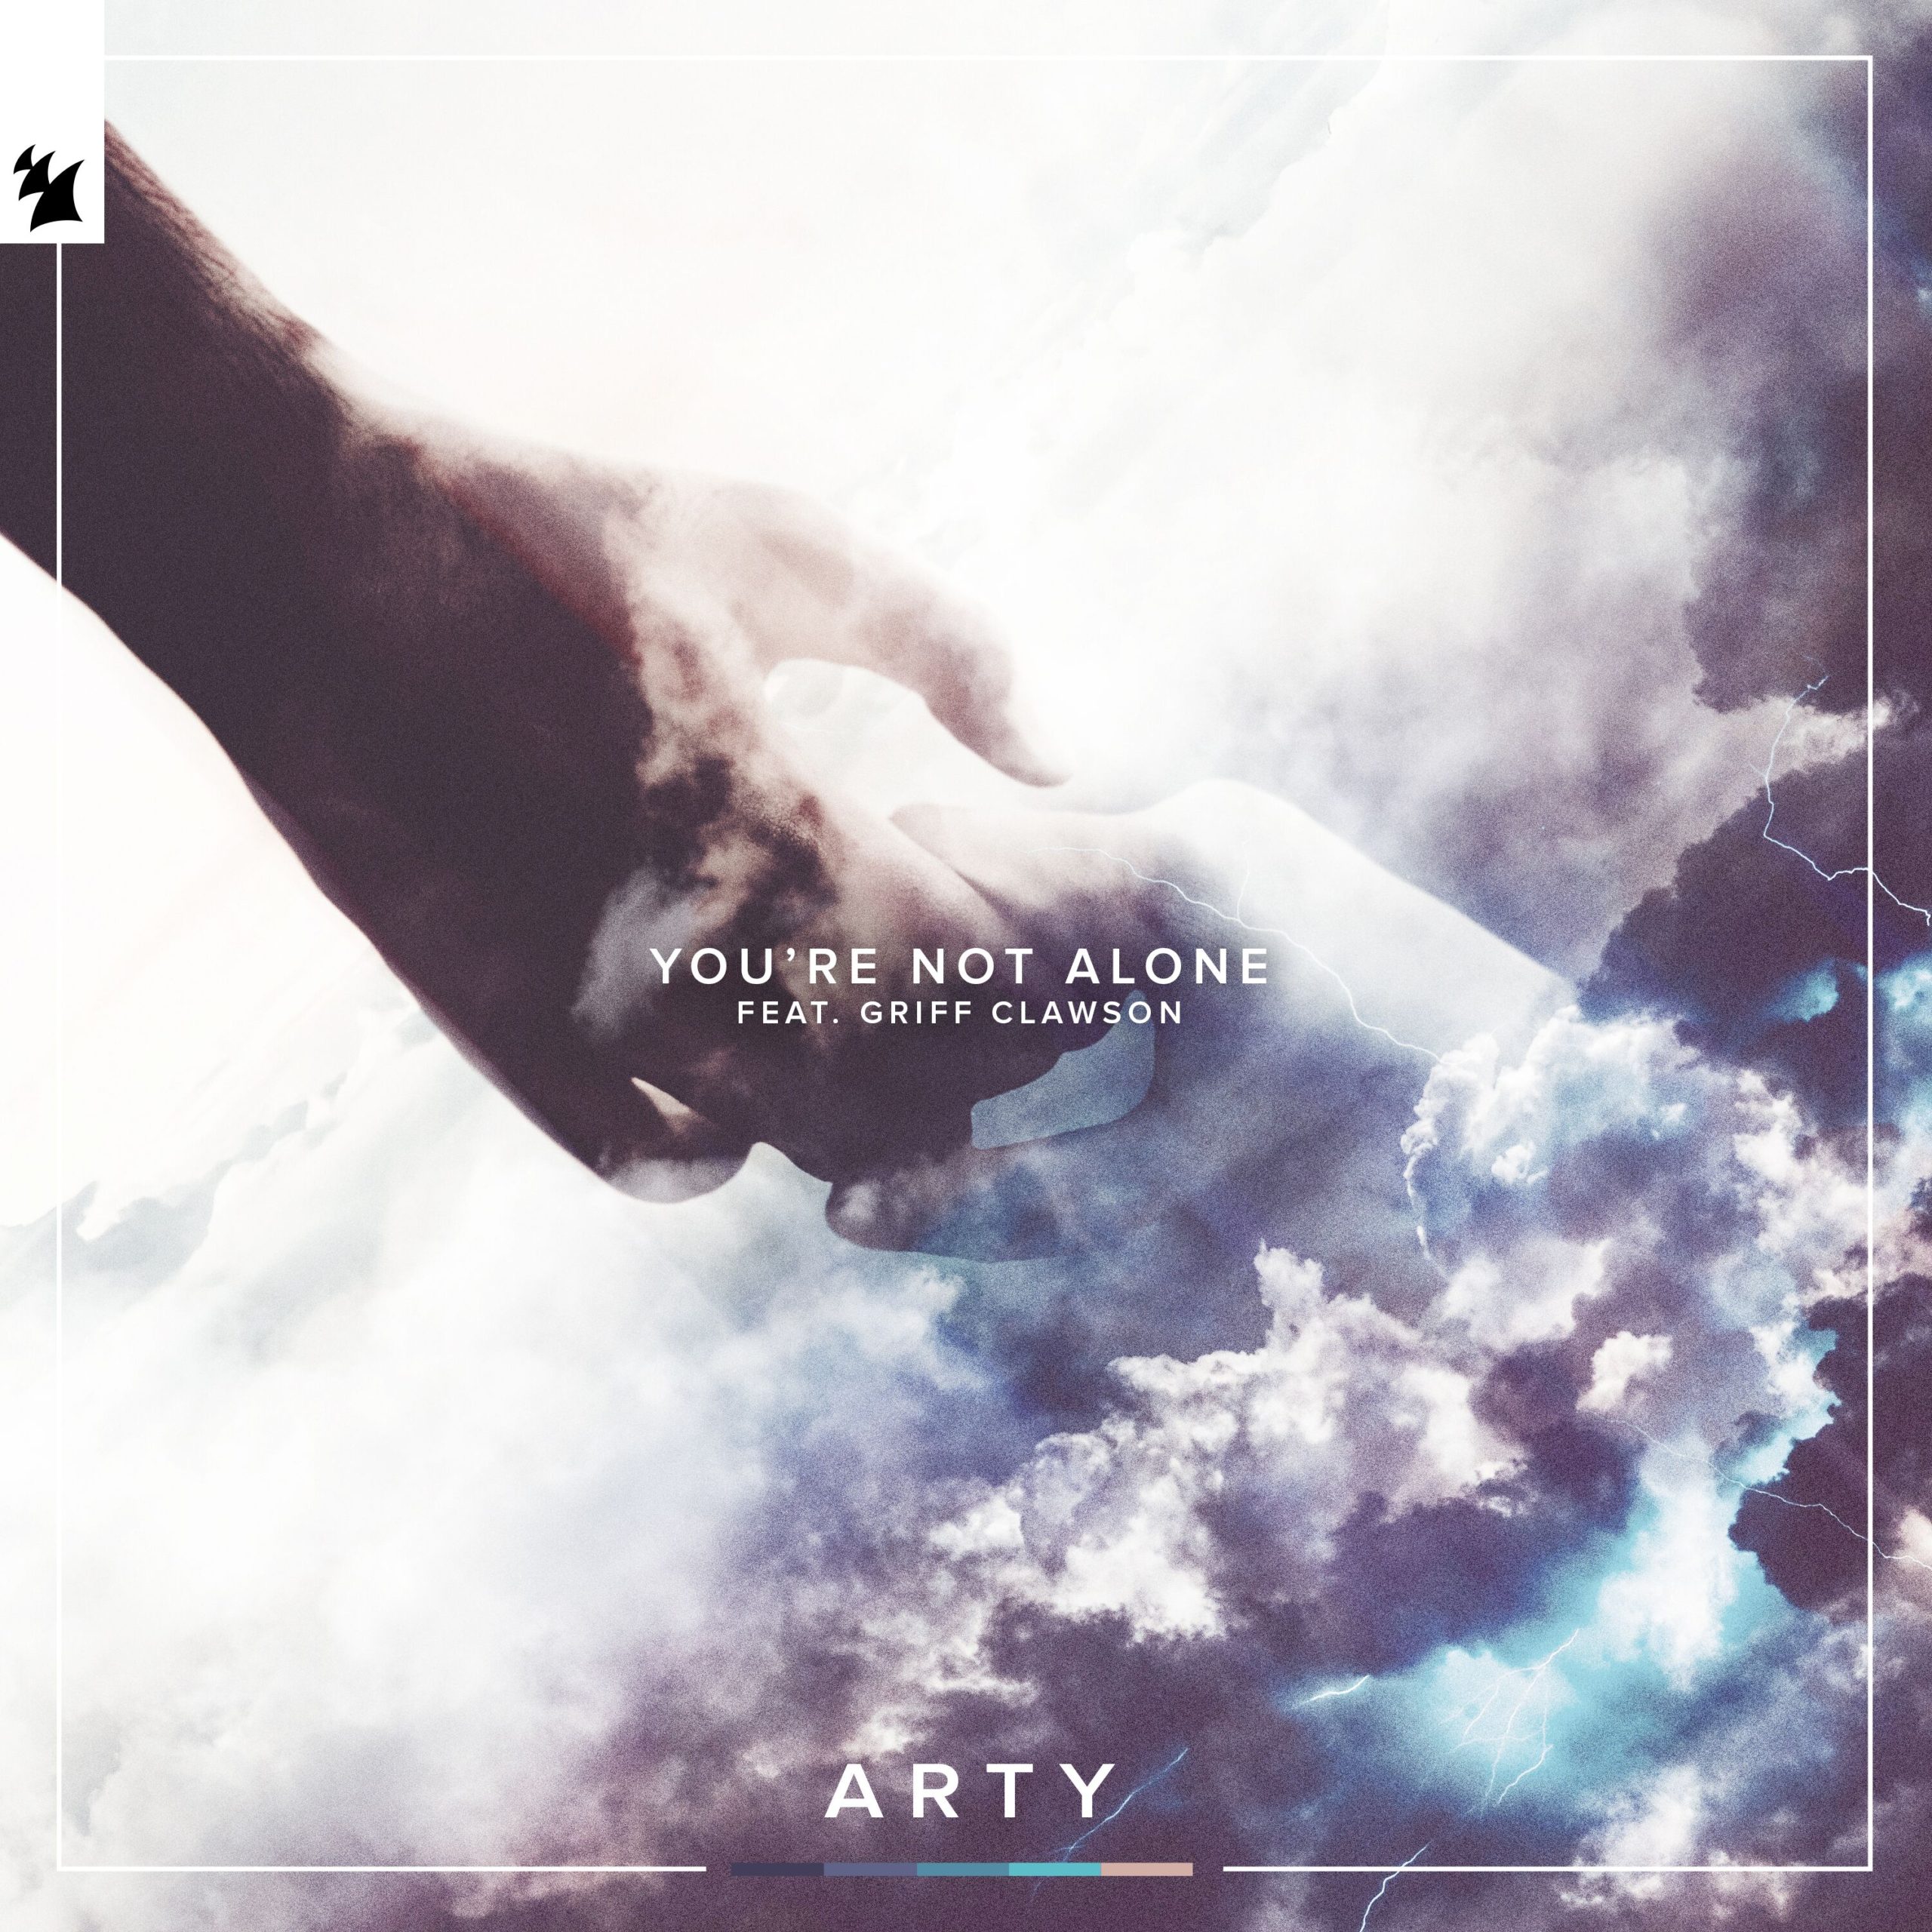 ARTY feat. Griff Clawson presents You’re Not Alone on Armada Music